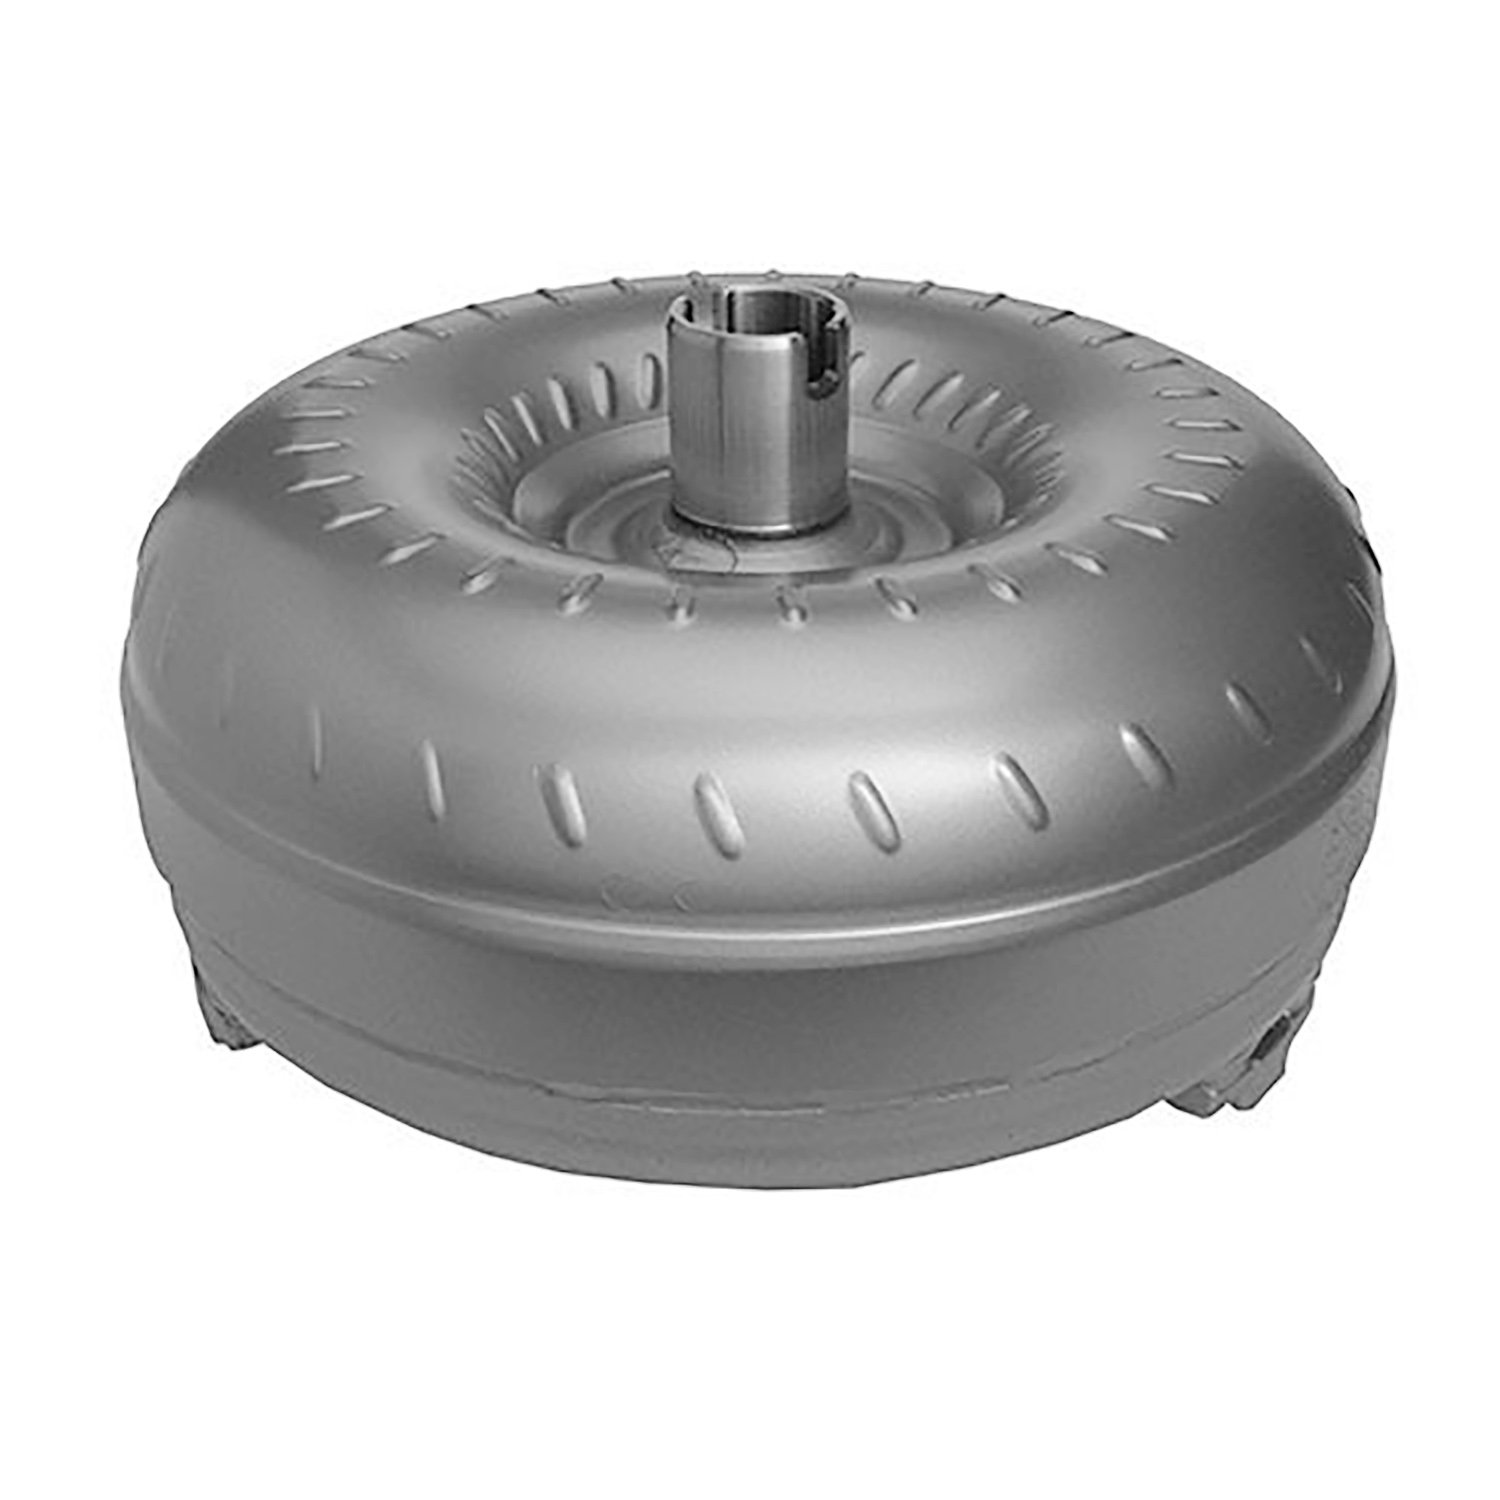 Remanufactured Automatic Transmission Torque Converter for GM 4L65/70 06-09 6.0